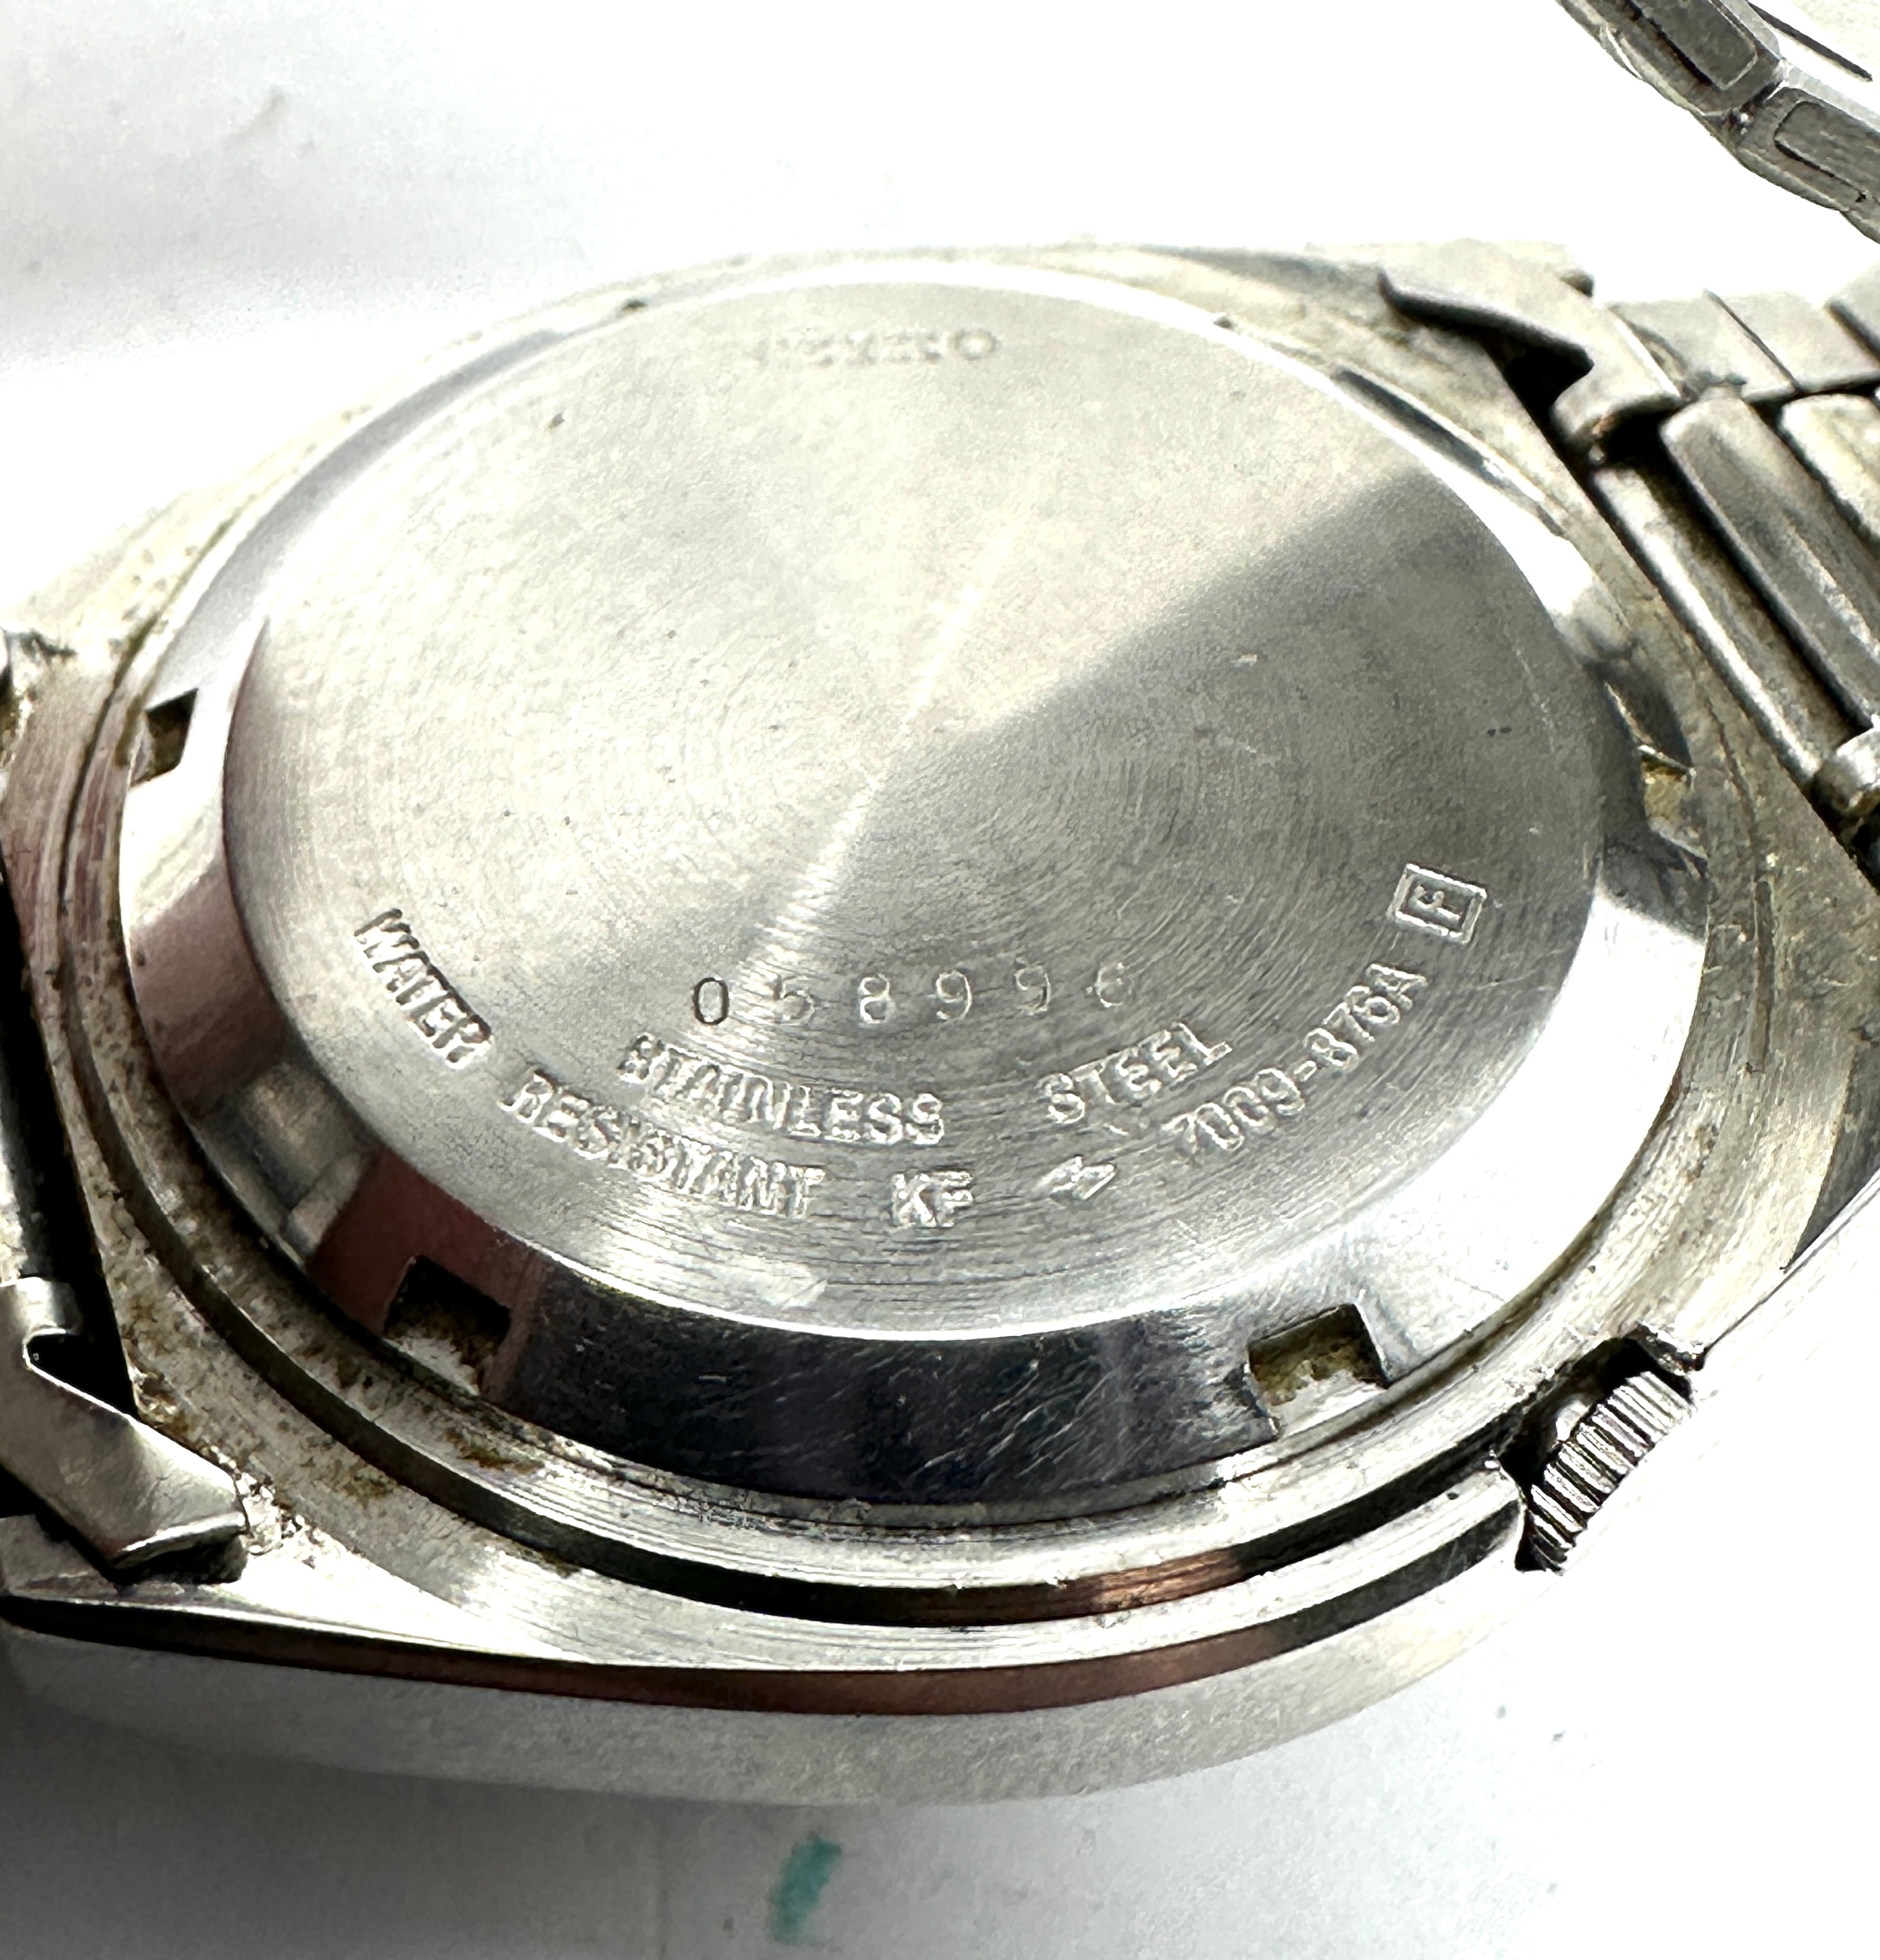 Gents Seiko 5 automatic wristwatch the watch is ticking 7009-876a day date - Image 4 of 4